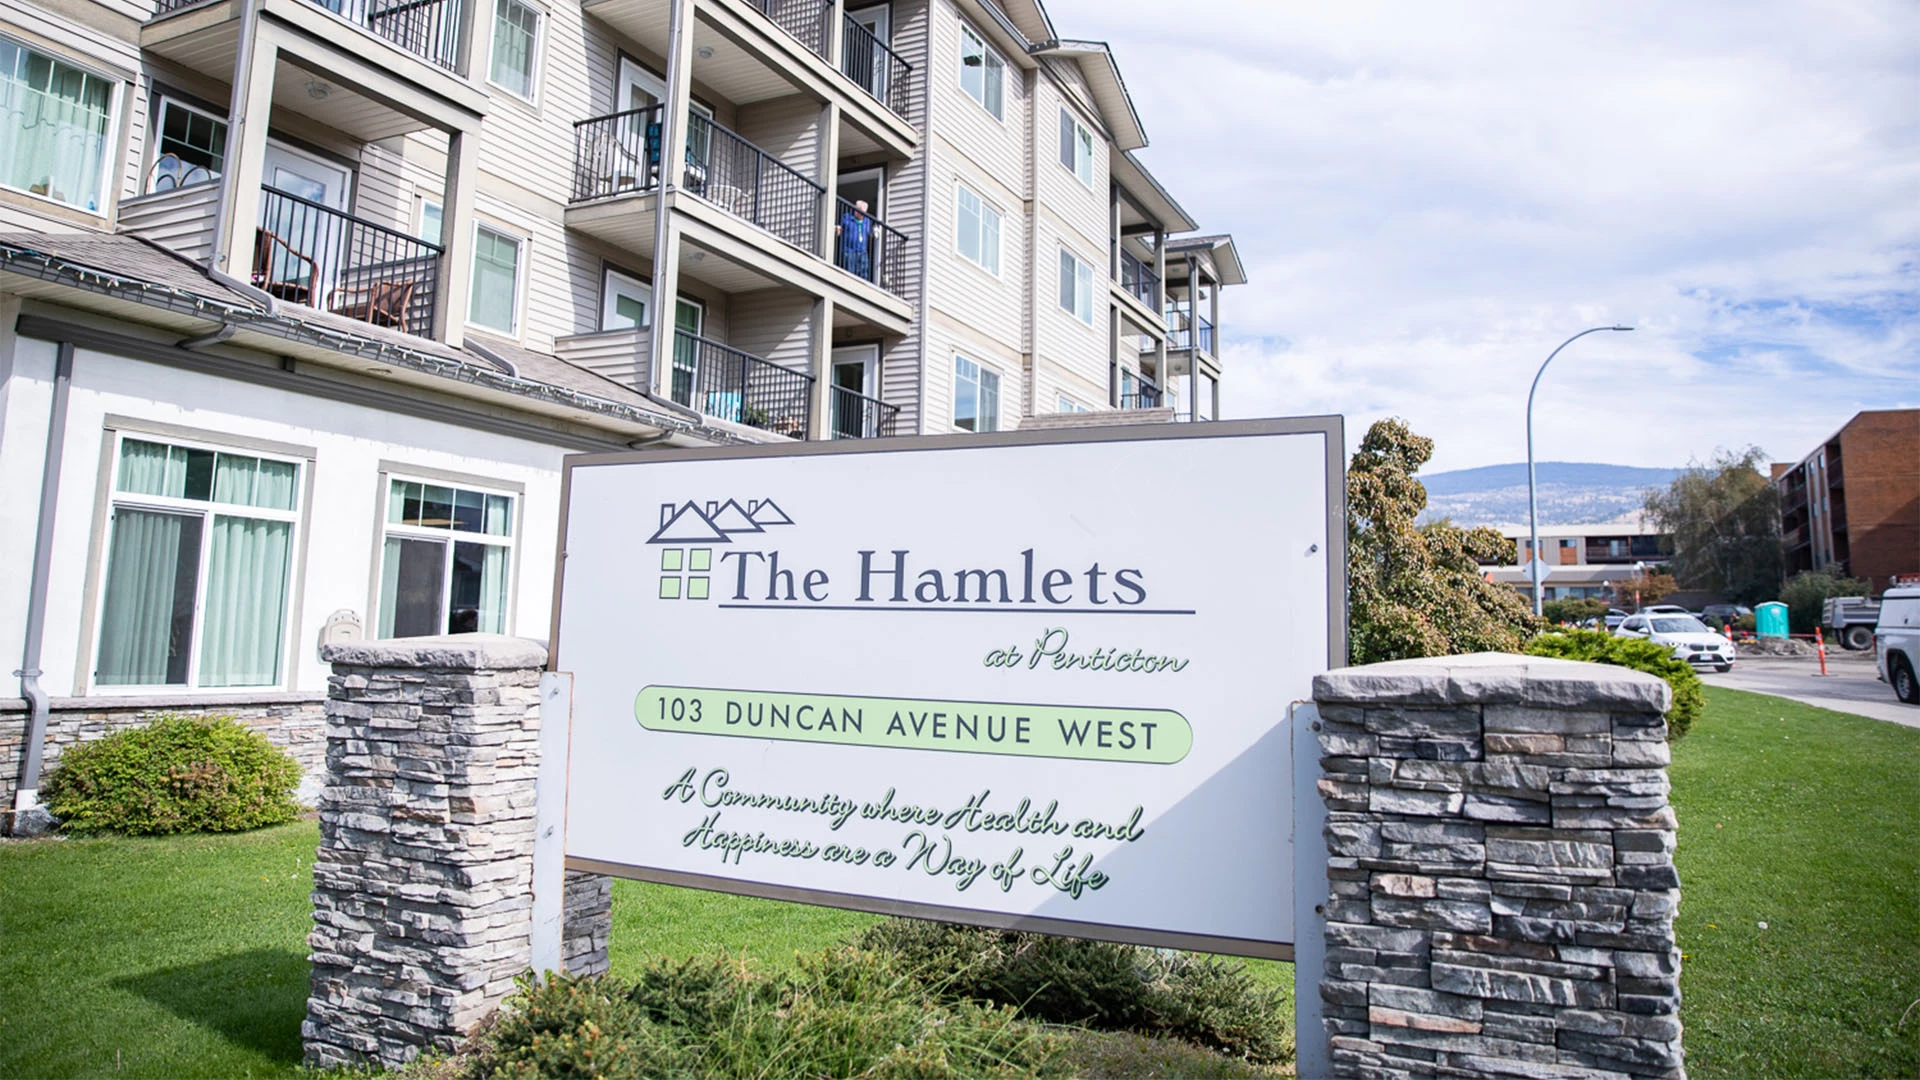 The Hamlets at Penticton retirement home address board